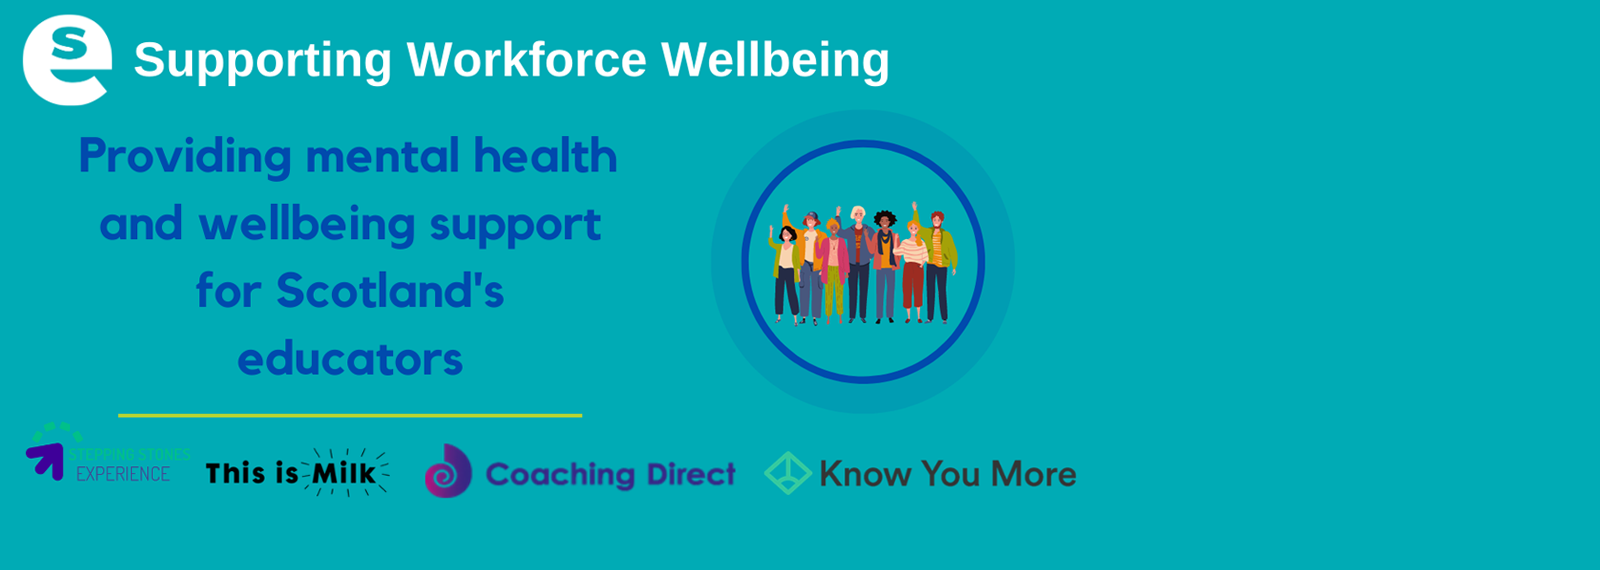 Discover more about the package of support for workforce wellbeing